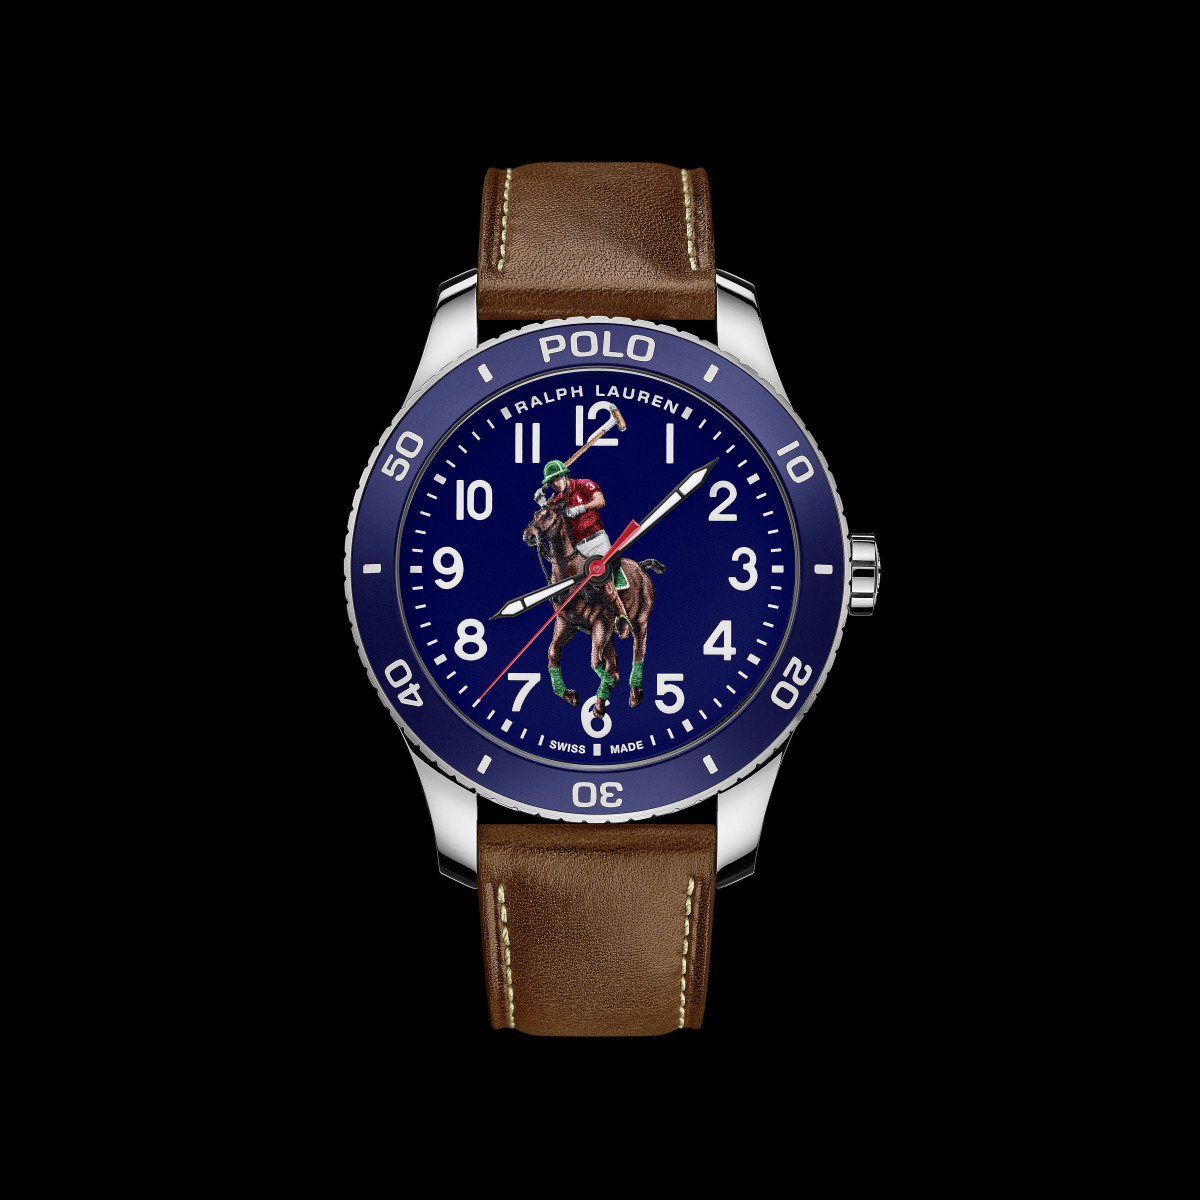 Ralph Lauren’s New Polo Watches Bring Bold, Preppy Style to Your Wrist ...